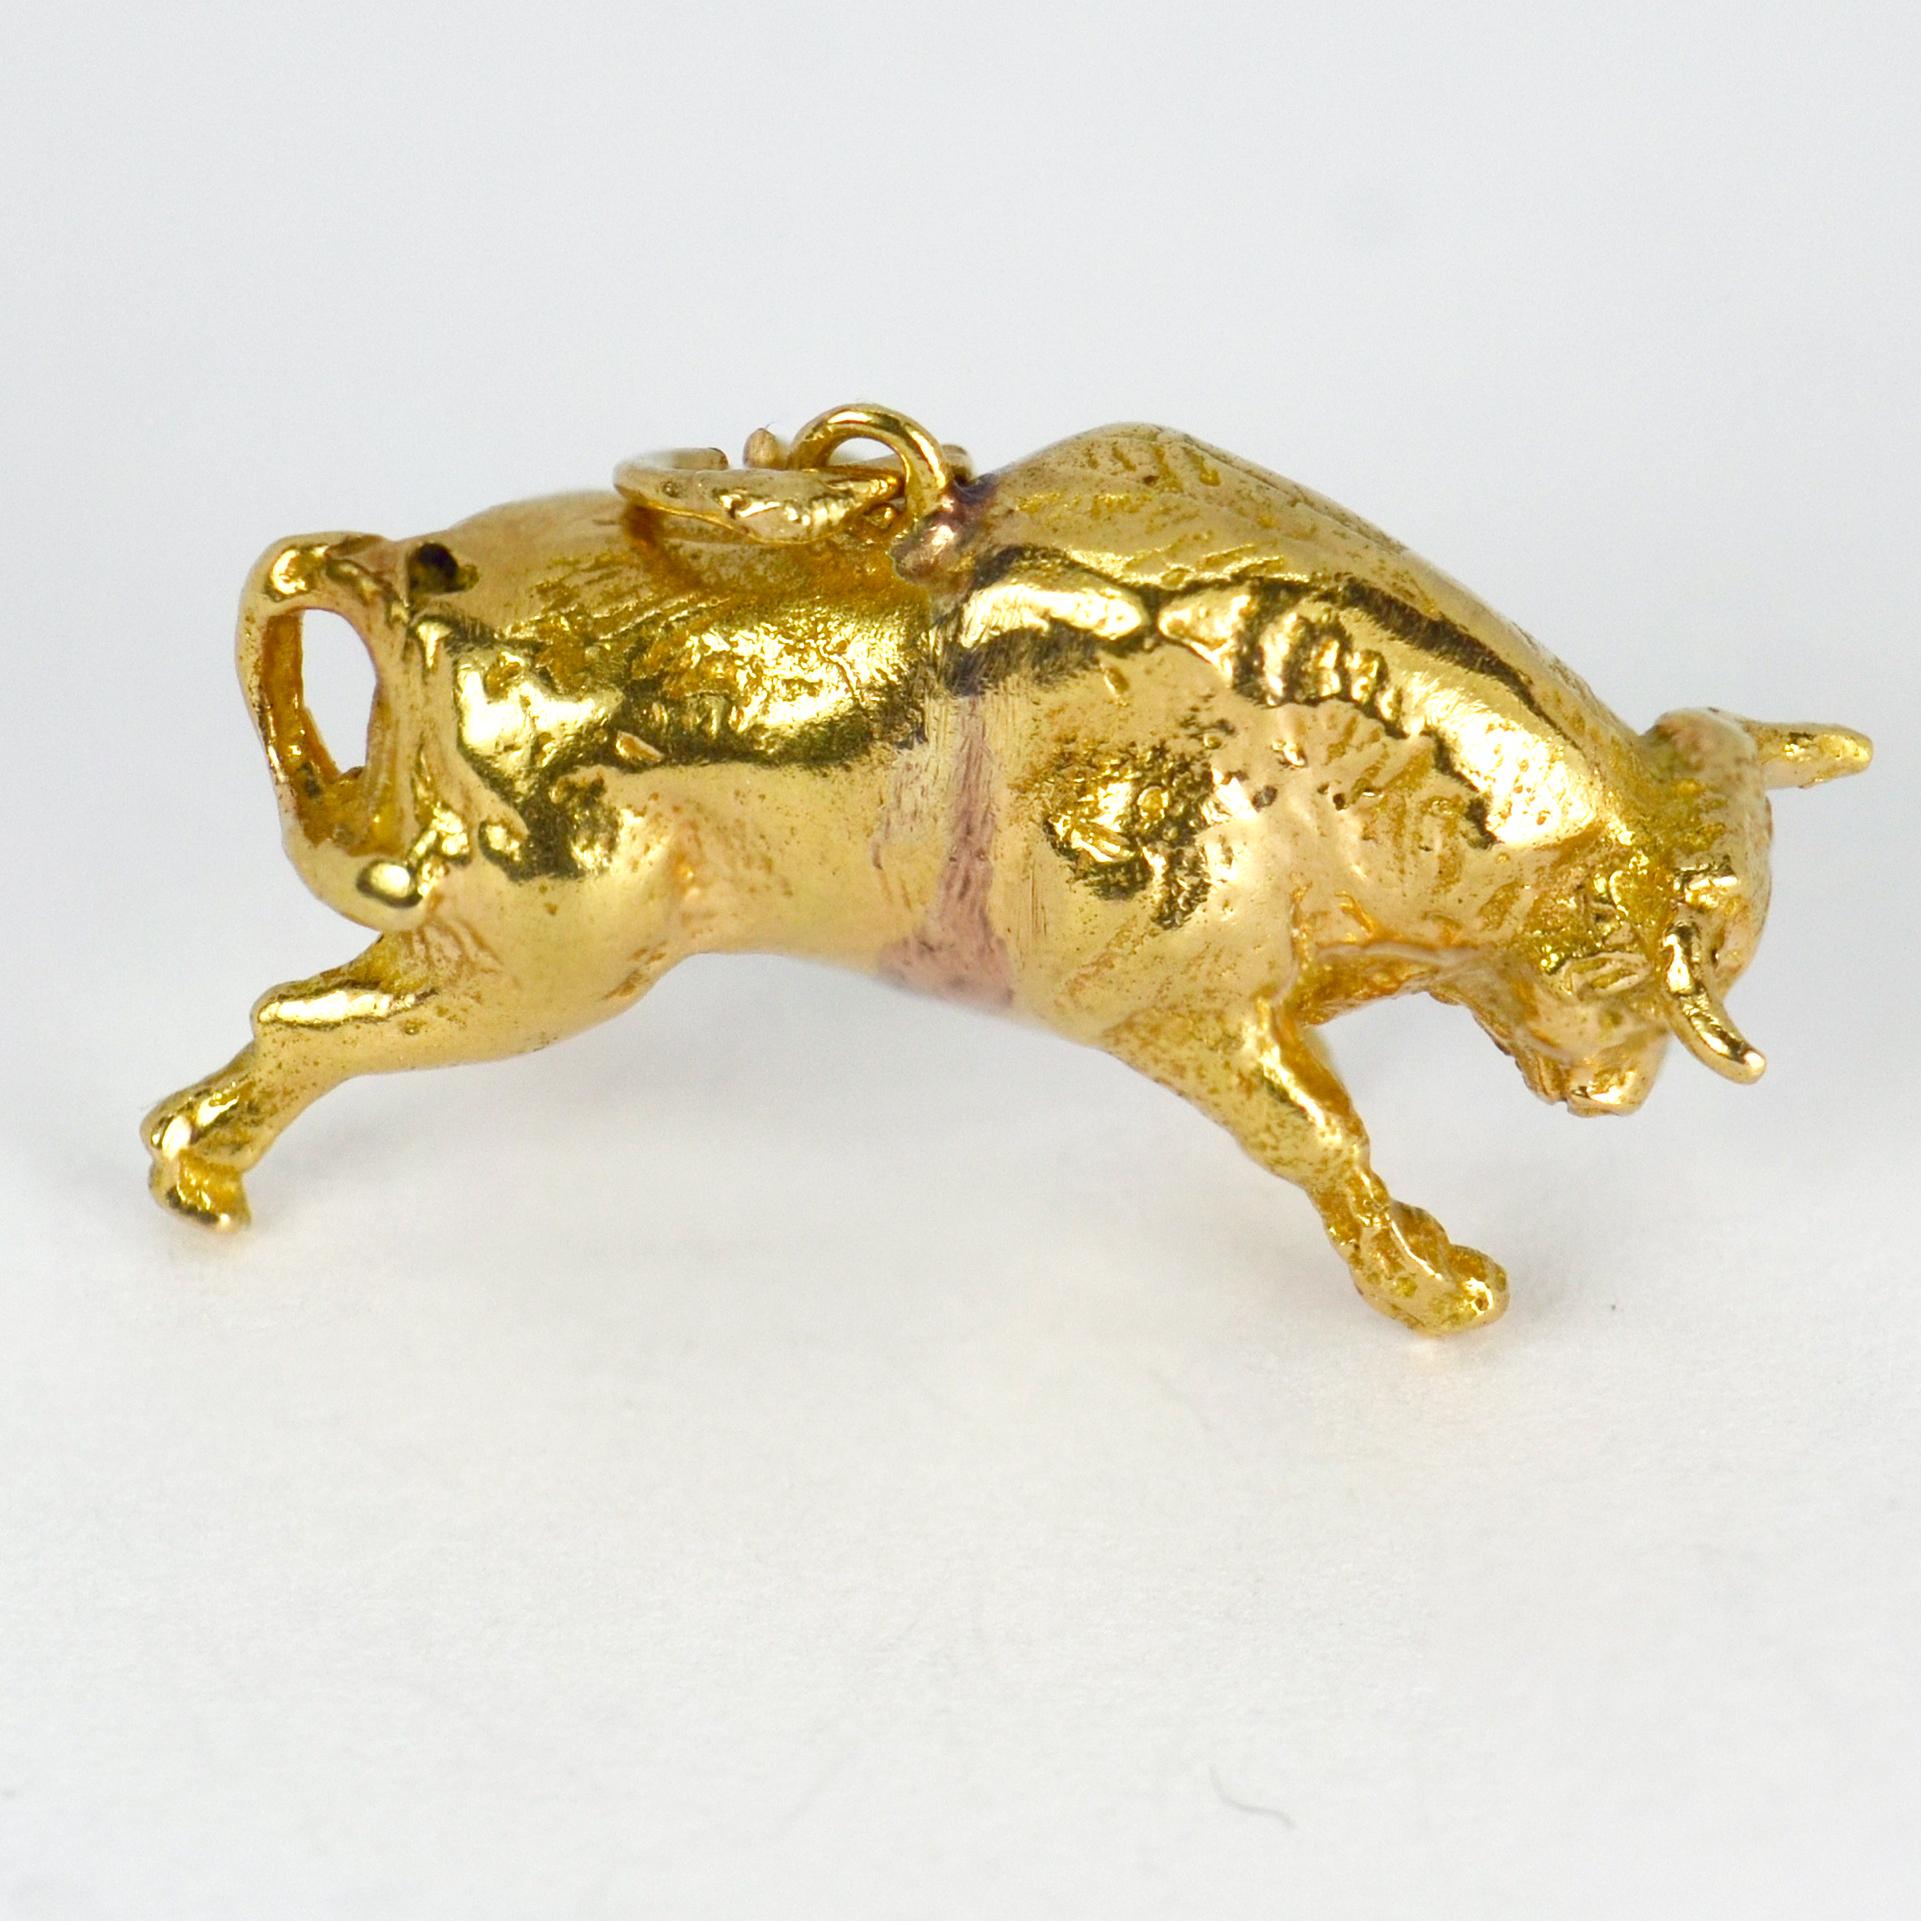 An 18 karat (18K) yellow gold charm pendant designed as a bull. Stamped 18K for 18 karat gold.

Dimensions: 2.5x 1.5 x 0.9 cm (not including jump ring)
Weight: 6.83 grams
